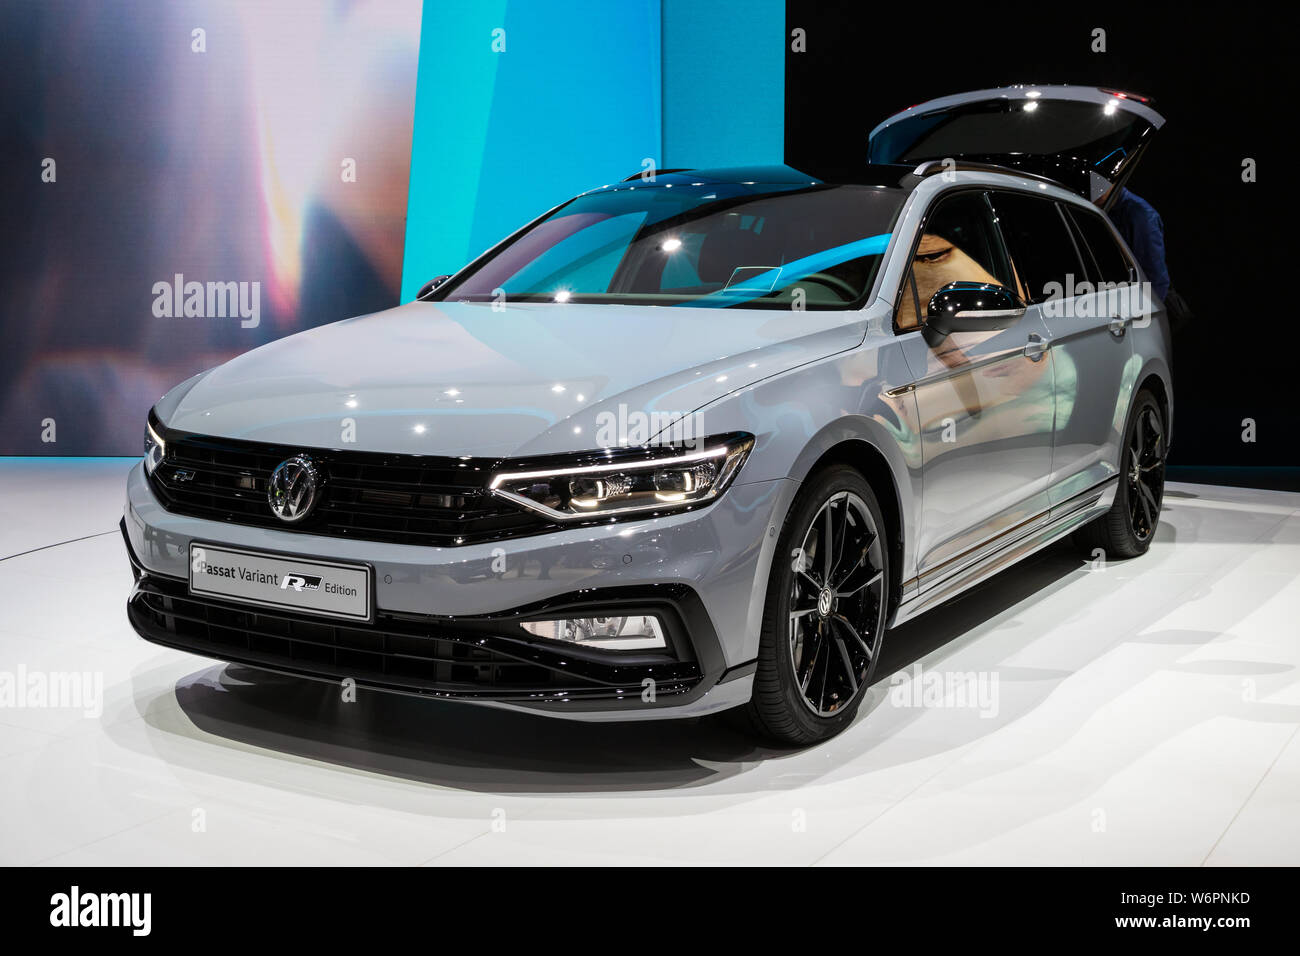 Page 3 - Vw Passat High Resolution Stock Photography and Images - Alamy